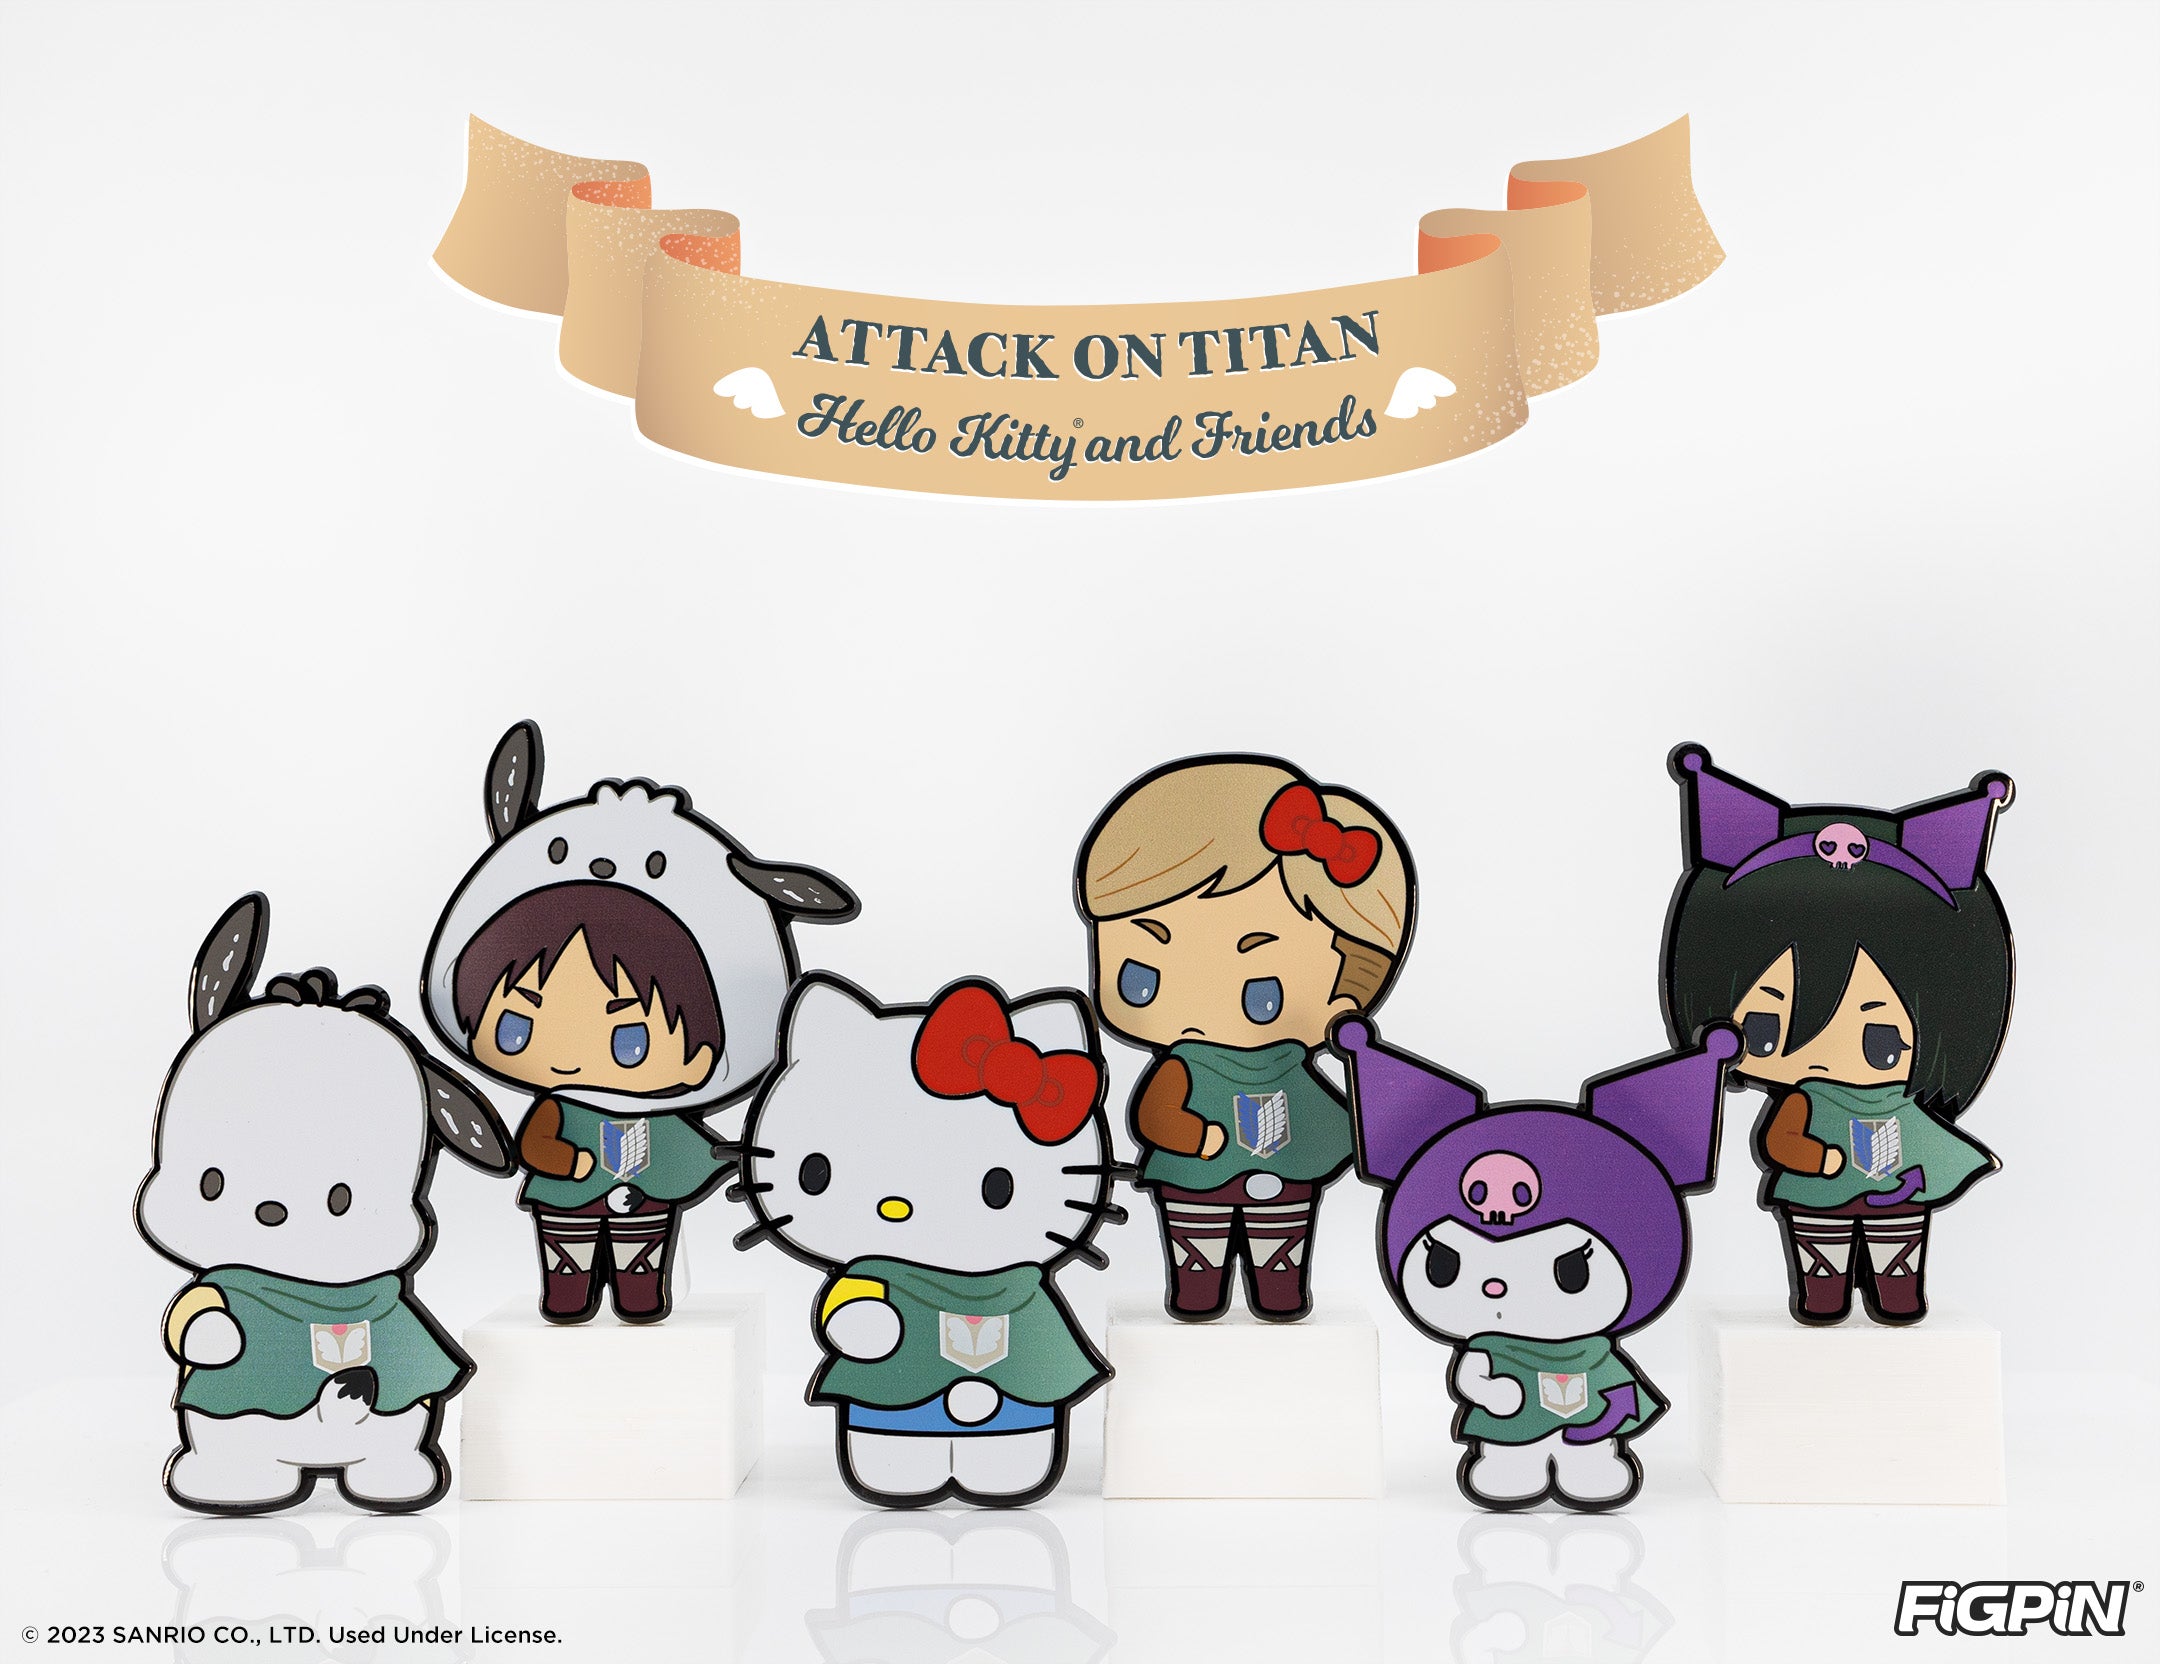 Photograph of Sanrio x Attack on Titan characters available as enamel pins in this Attack on Titan x Hello Kitty and Friends FiGPiN wave release